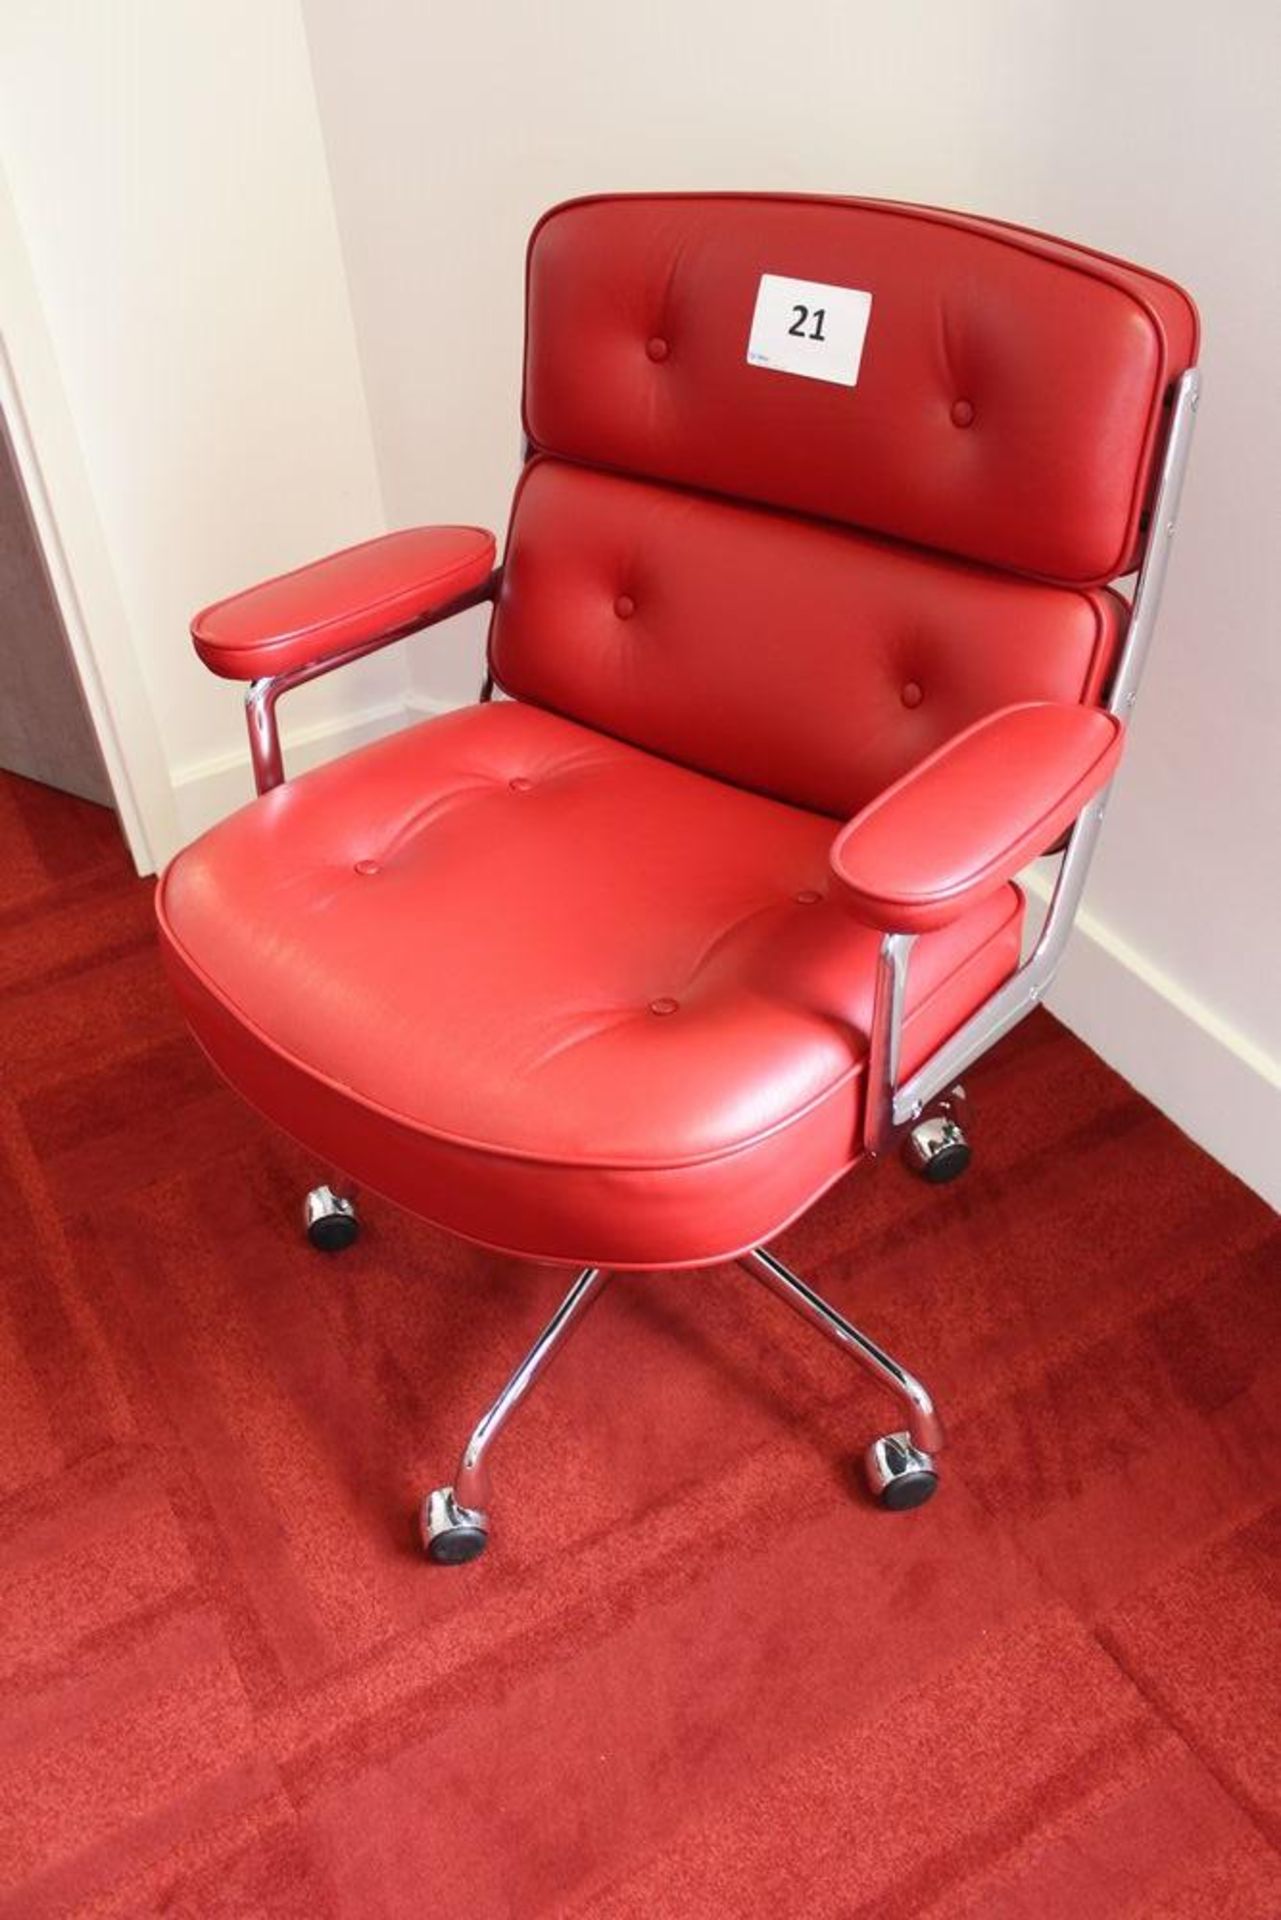 Vitra Eames Red Leather Lobby Chair